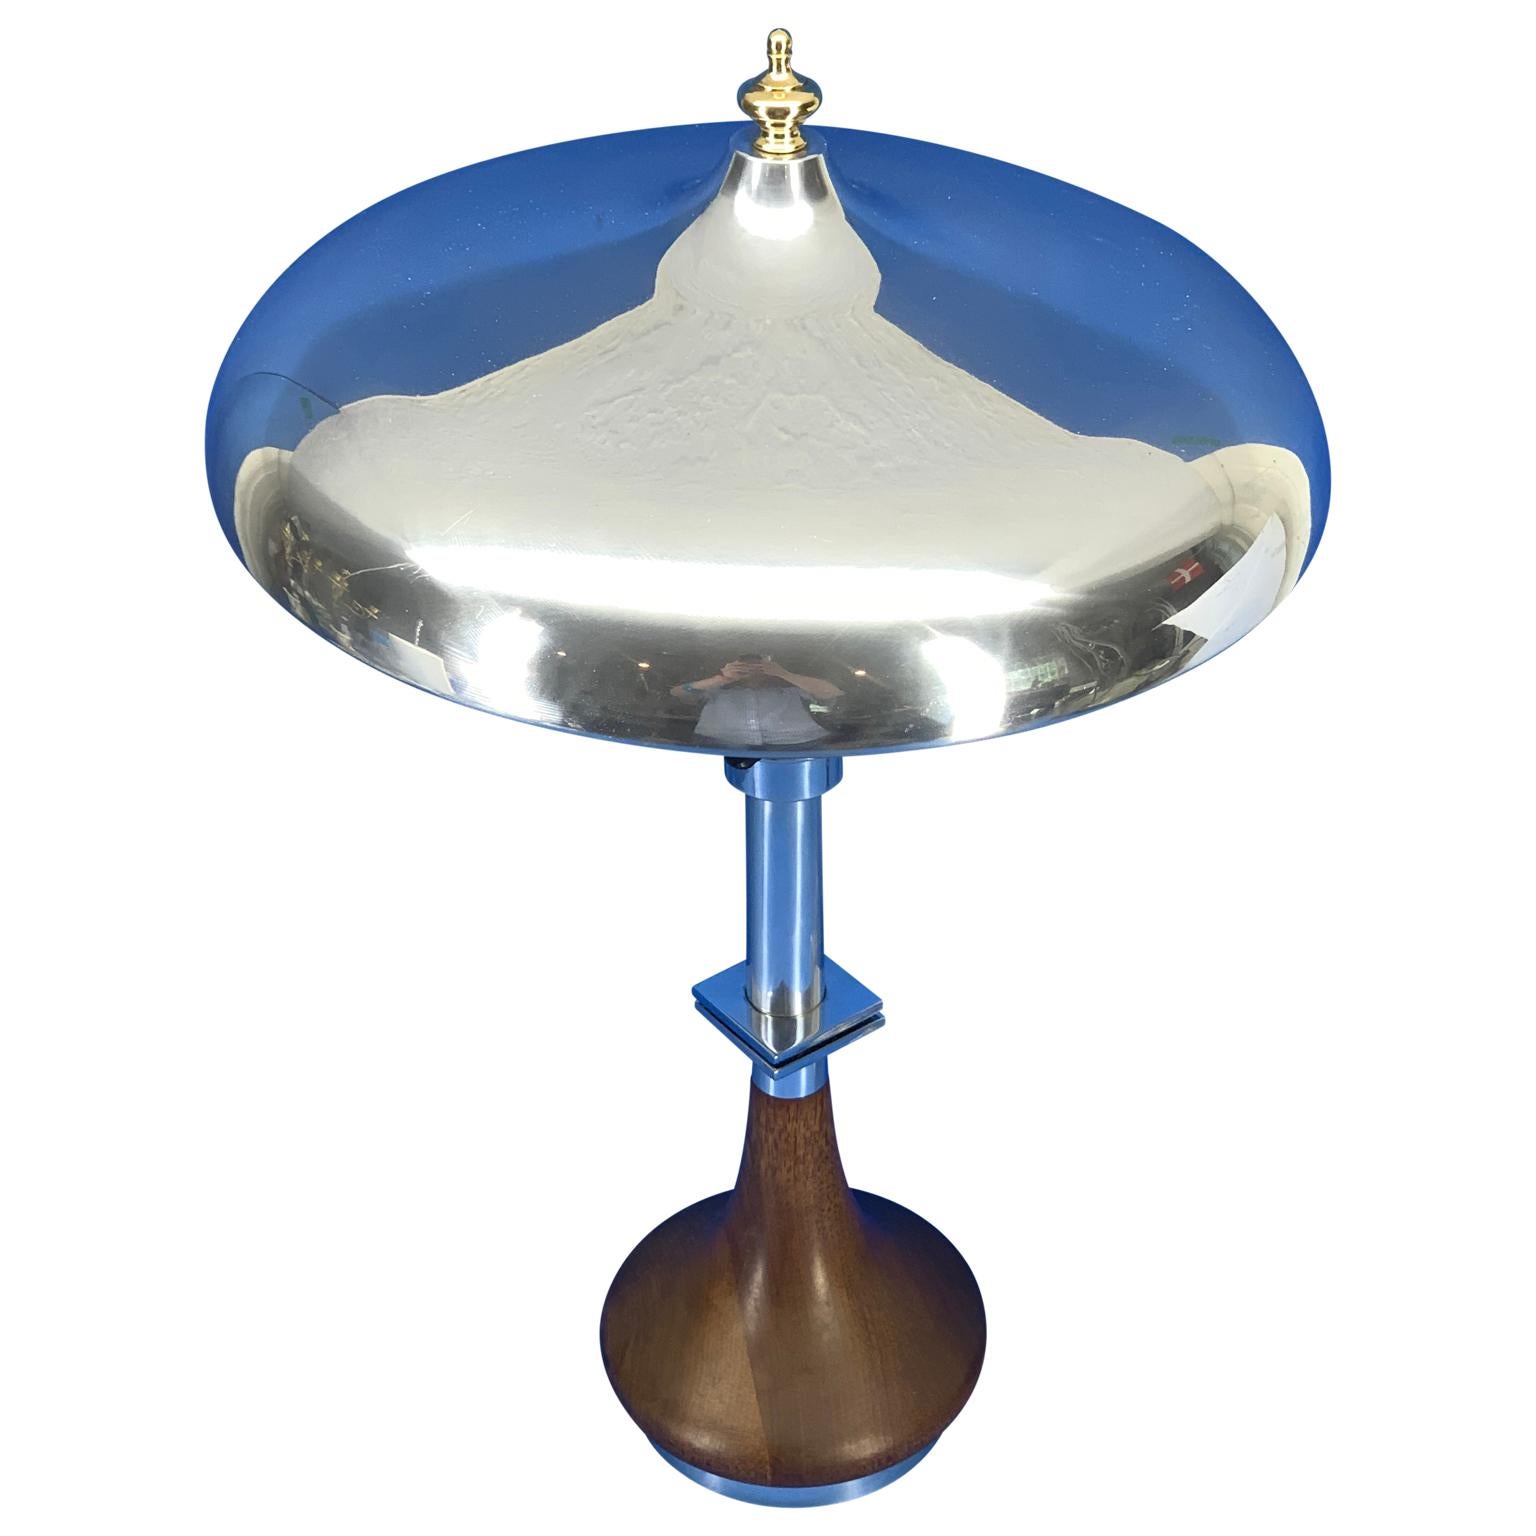 Scandinavian Art Deco Table Lamp With Chrome Shade And Solid Brass Finial 2